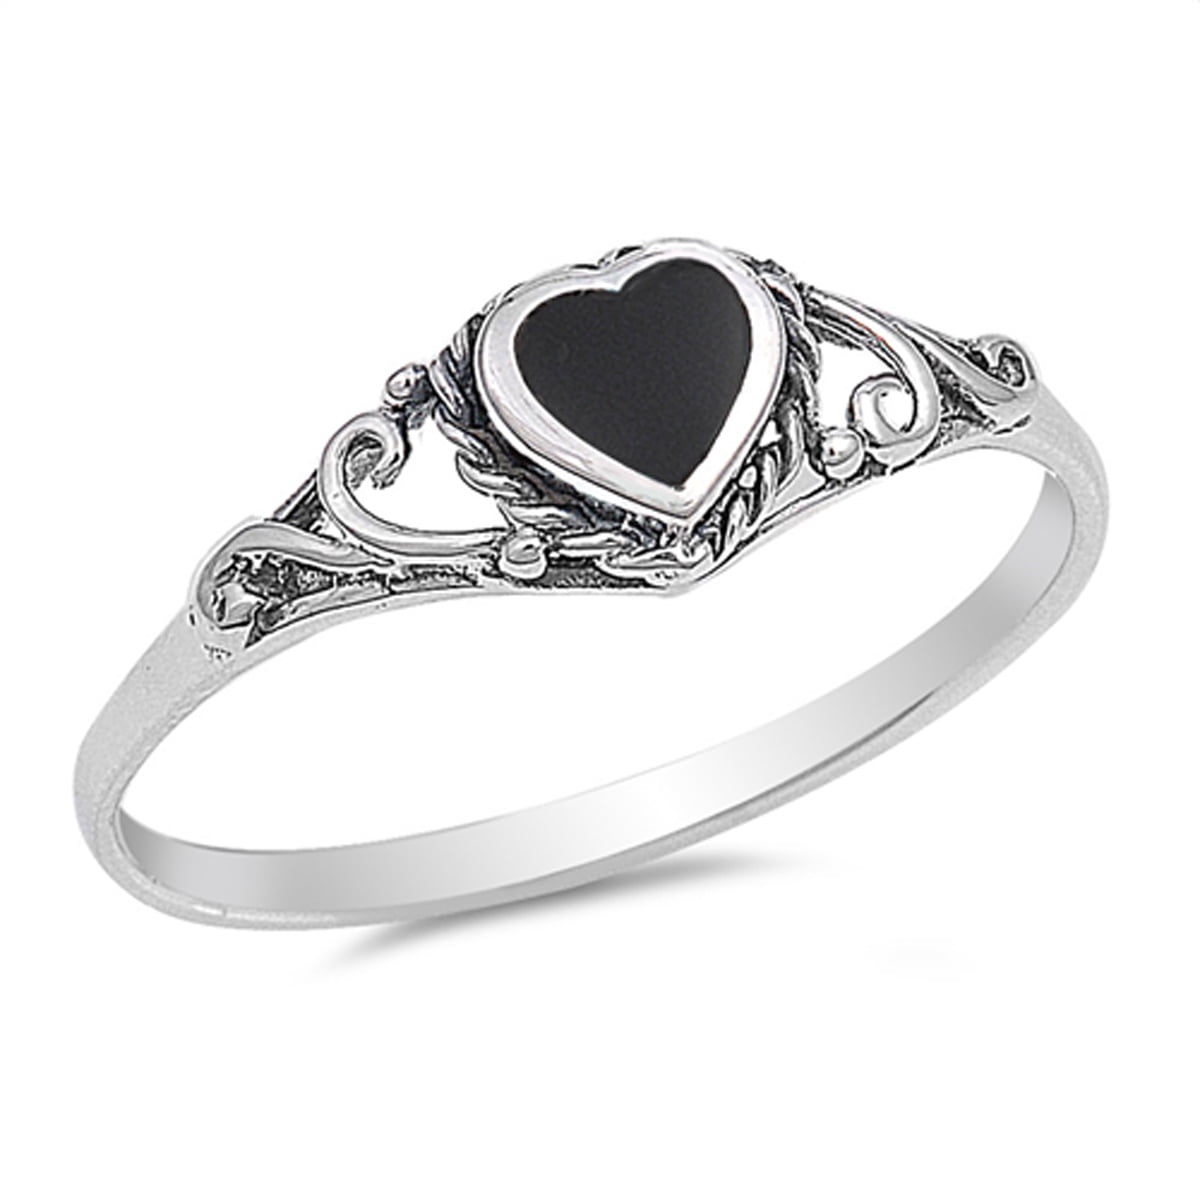 USA Seller Black Onyx Heart Ring Sterling Silver 925 Size 10 